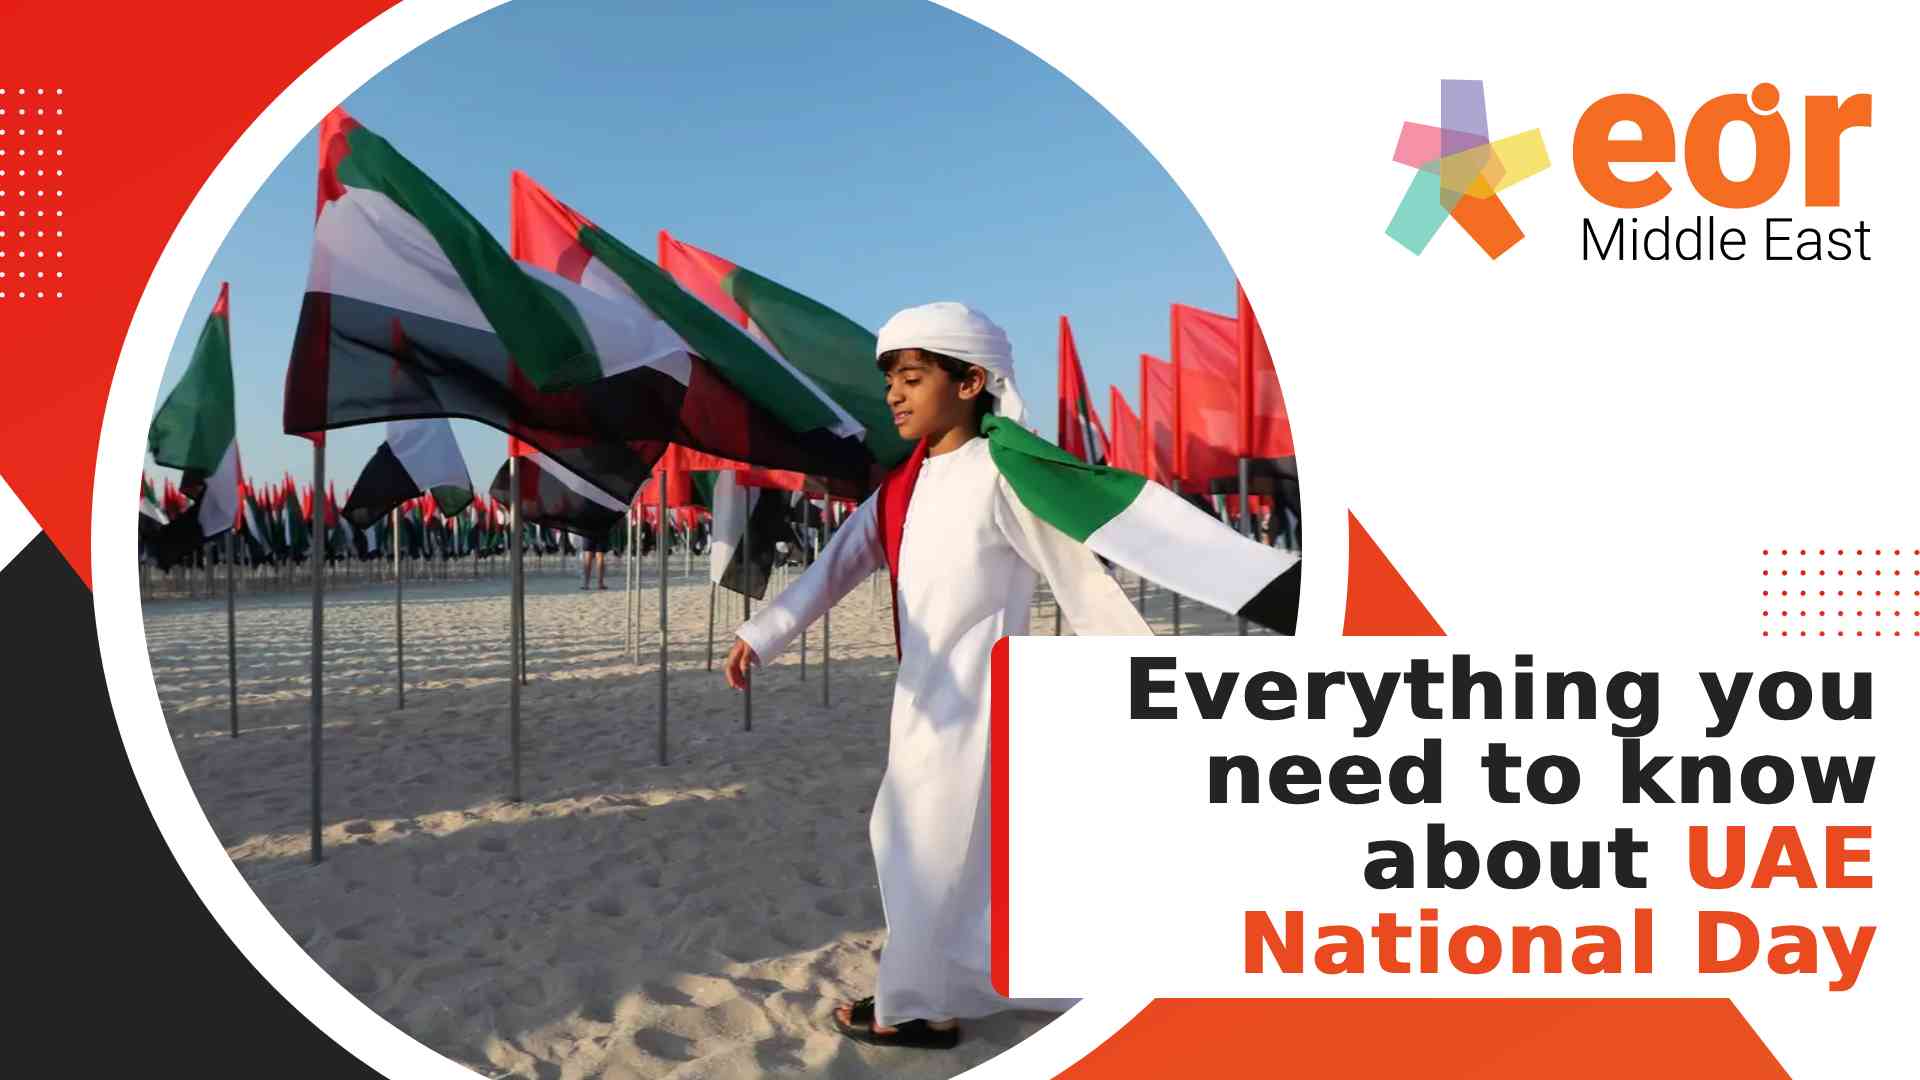 Everything you need to know about UAE National Day